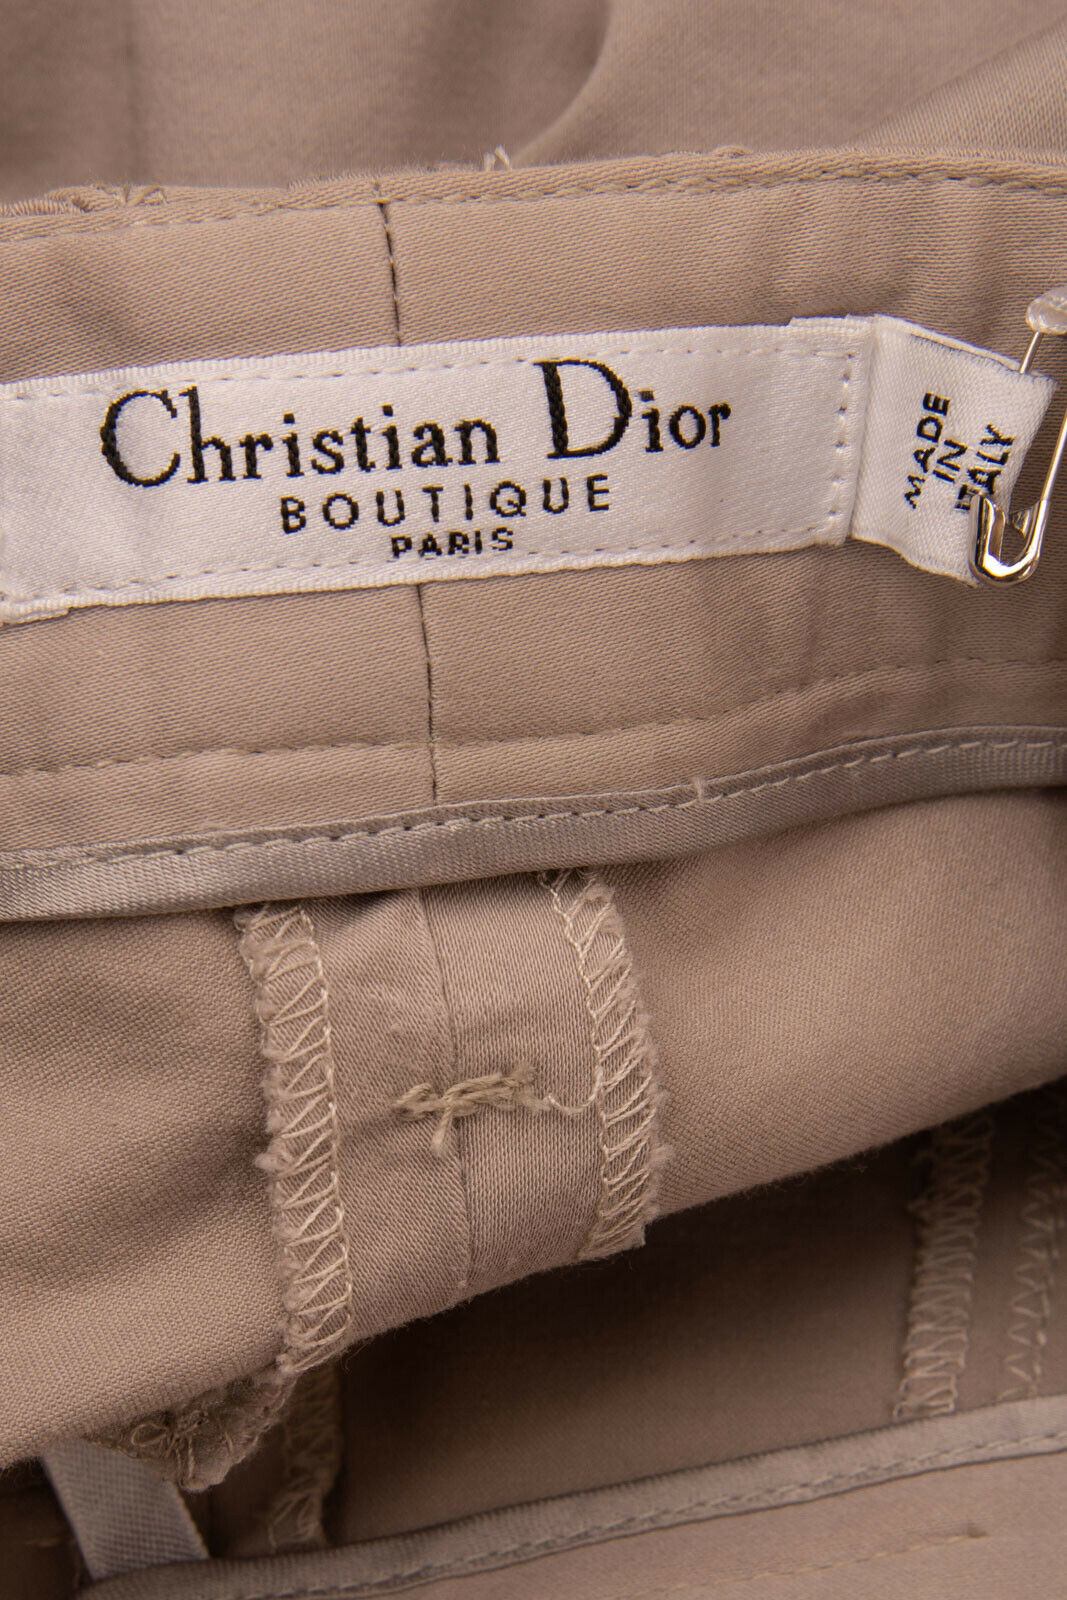 CHRISTIAN DIOR Pants Size S Zipped Cuffs Made in Italy